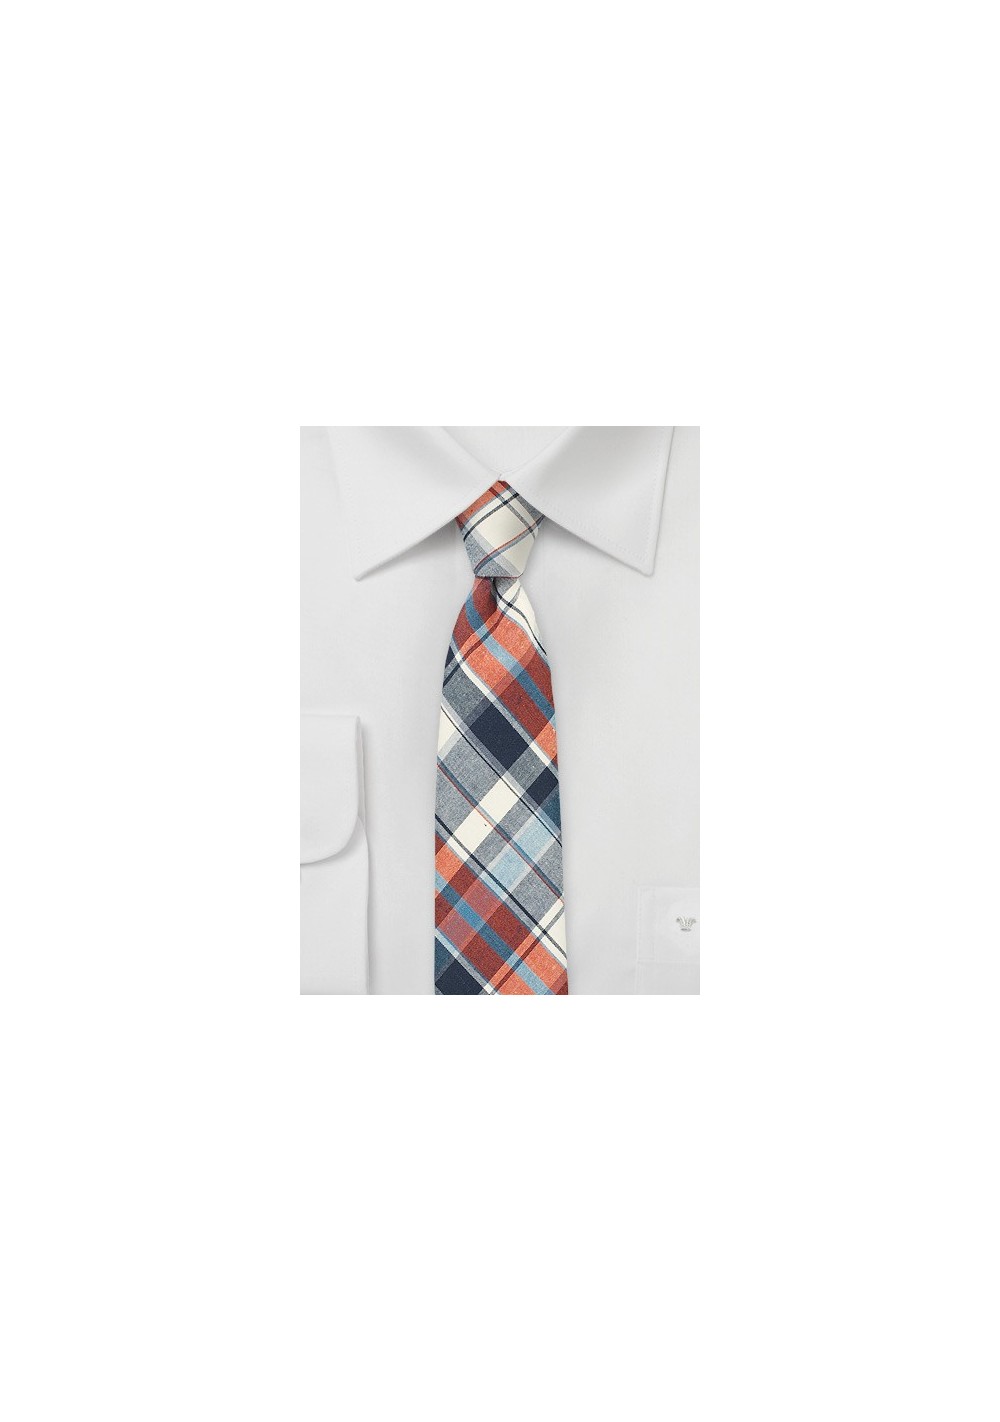 Cotton Madras Tie in Cream, Red, and Blue